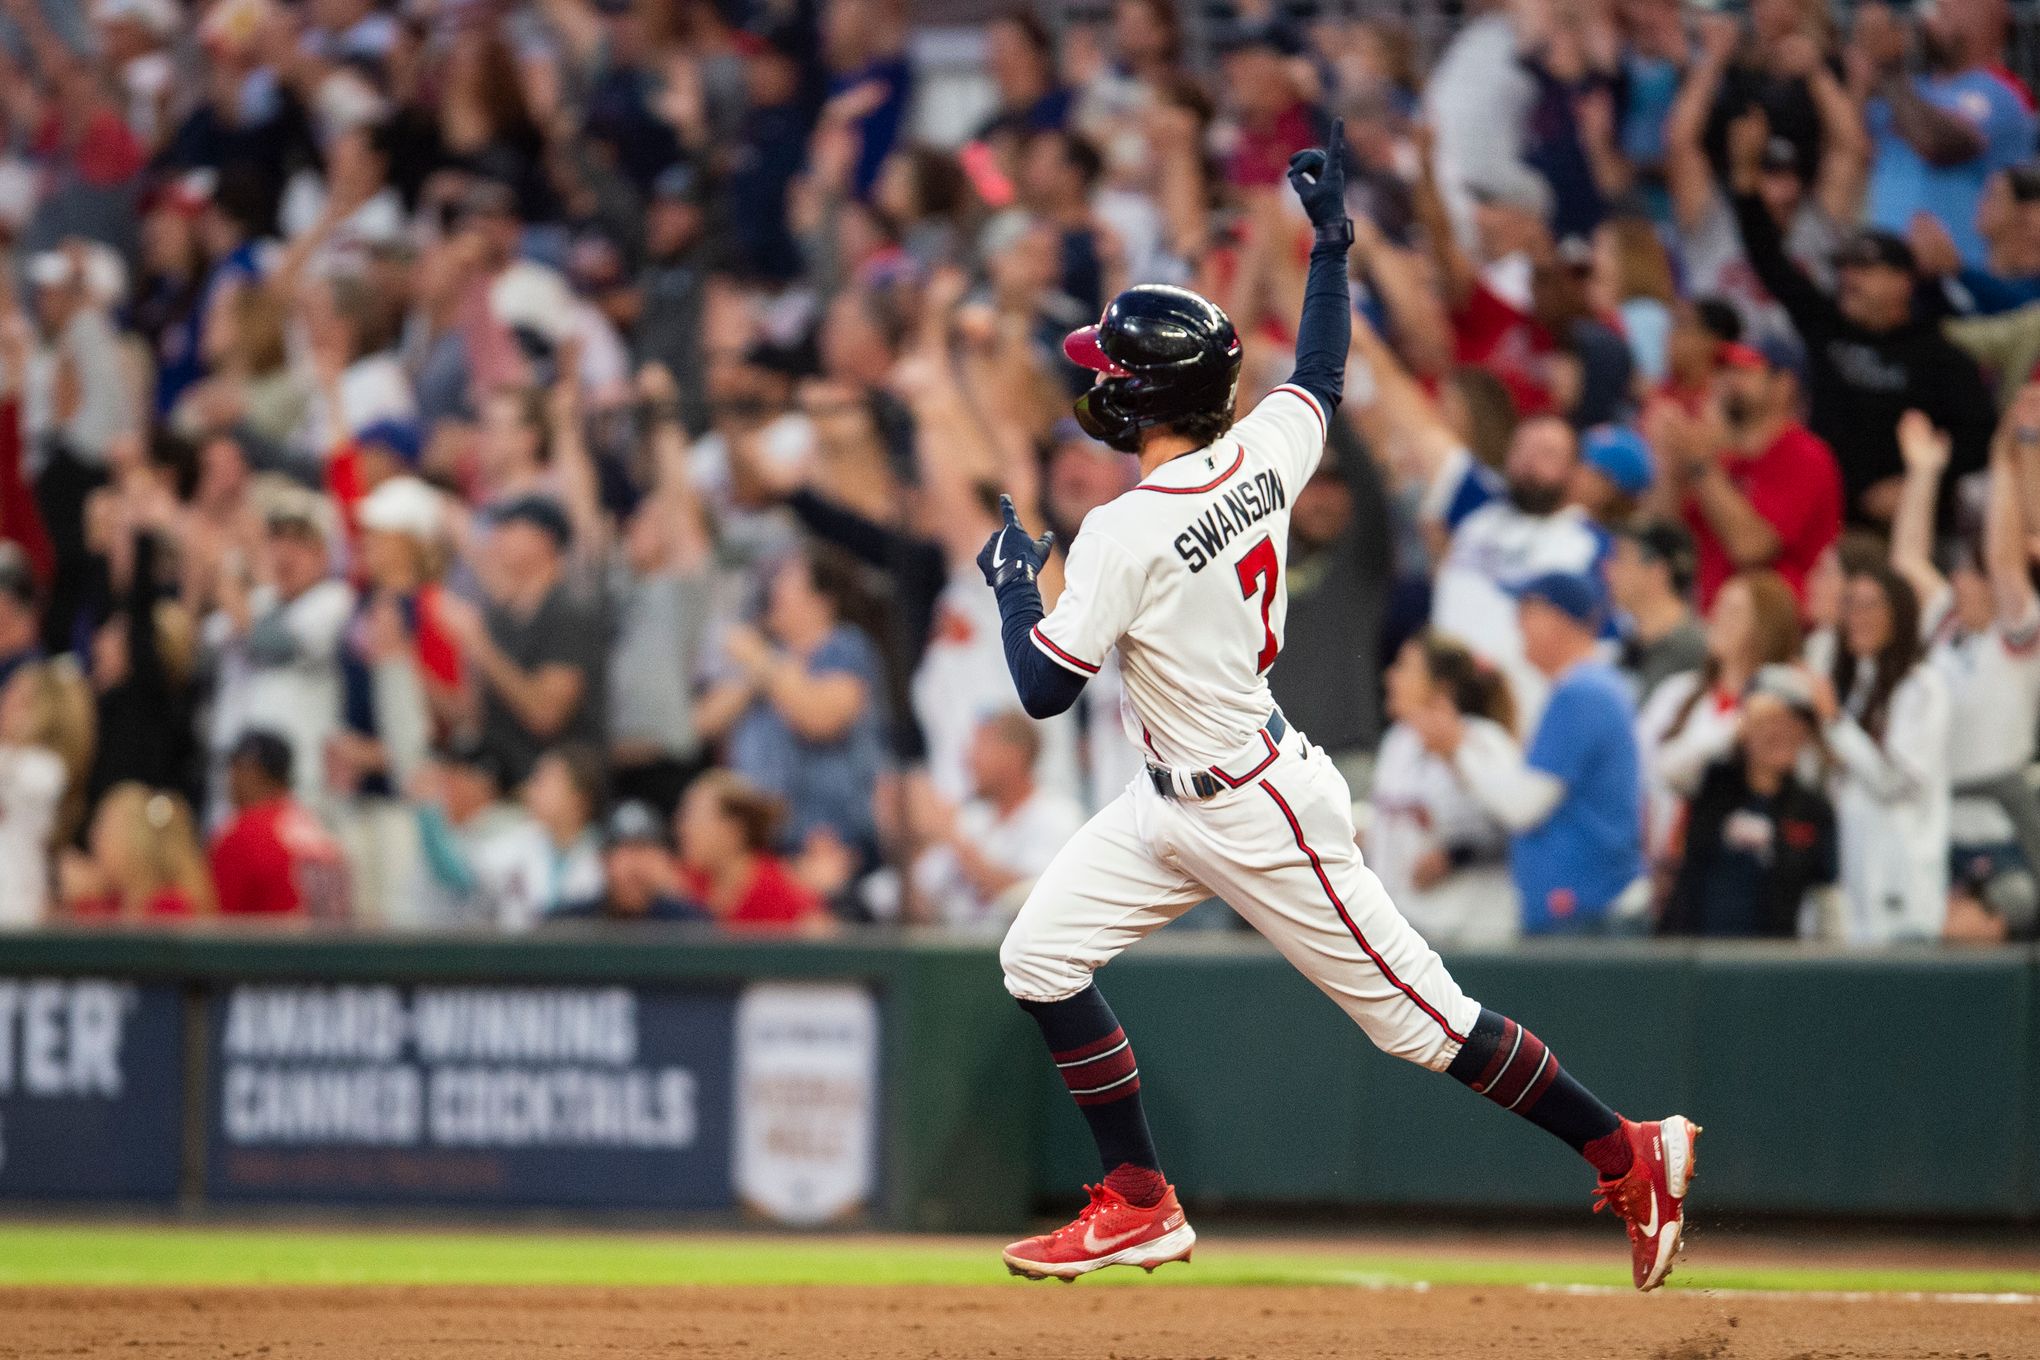 Ozzie Albies' walk-off double in 11th inning continues trend for